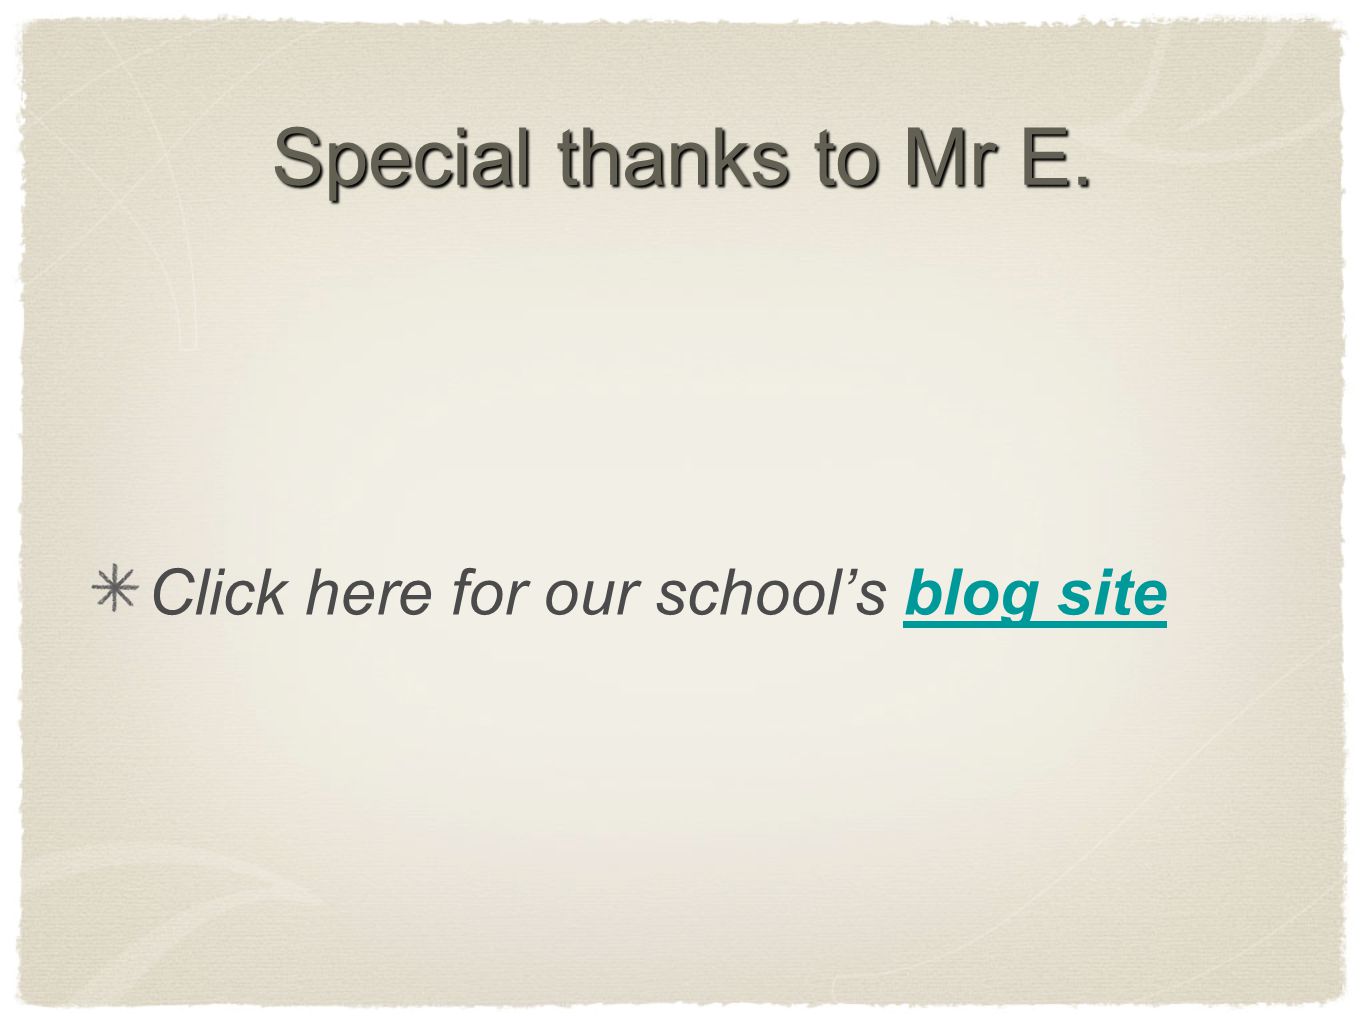 Special thanks to Mr E. Click here for our school’s blog siteblog site